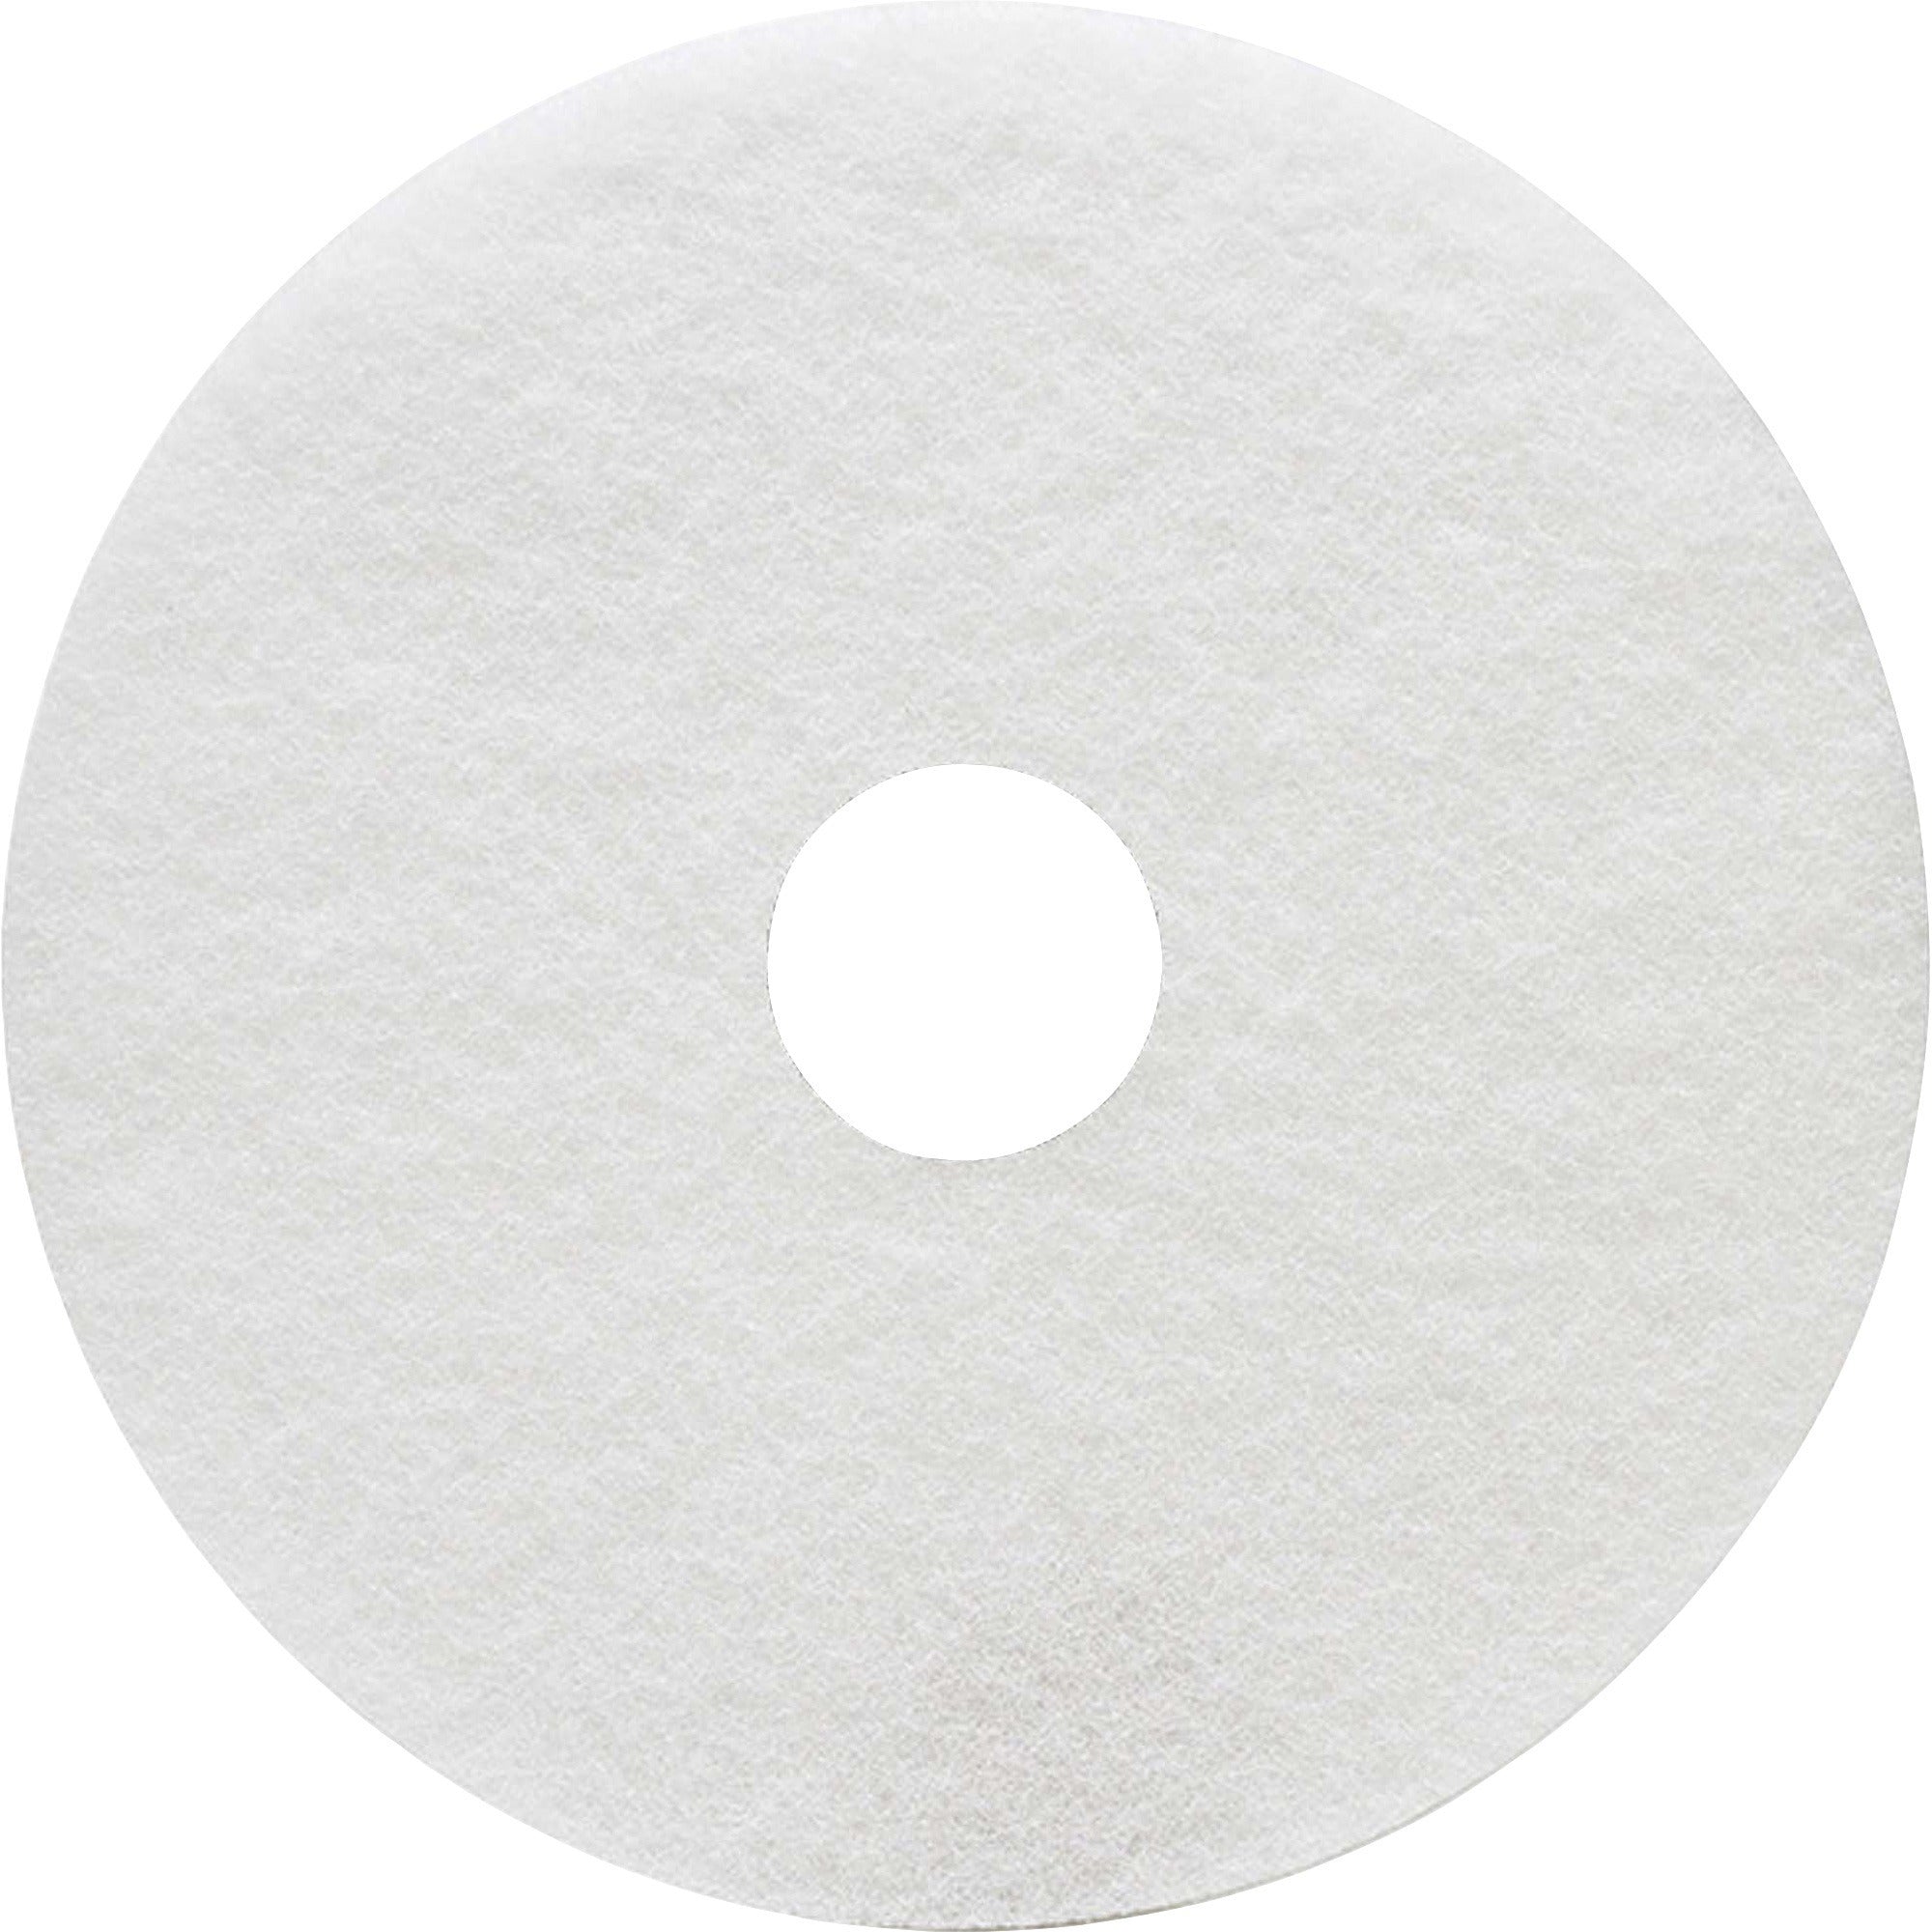 genuine-joe-floor-cleaner-pad-5-carton-round-x-16-diameter-scrubbing-cleaning-350-rpm-to-800-rpm-speed-supported-resilient-flexible-white_gjo18405 - 1